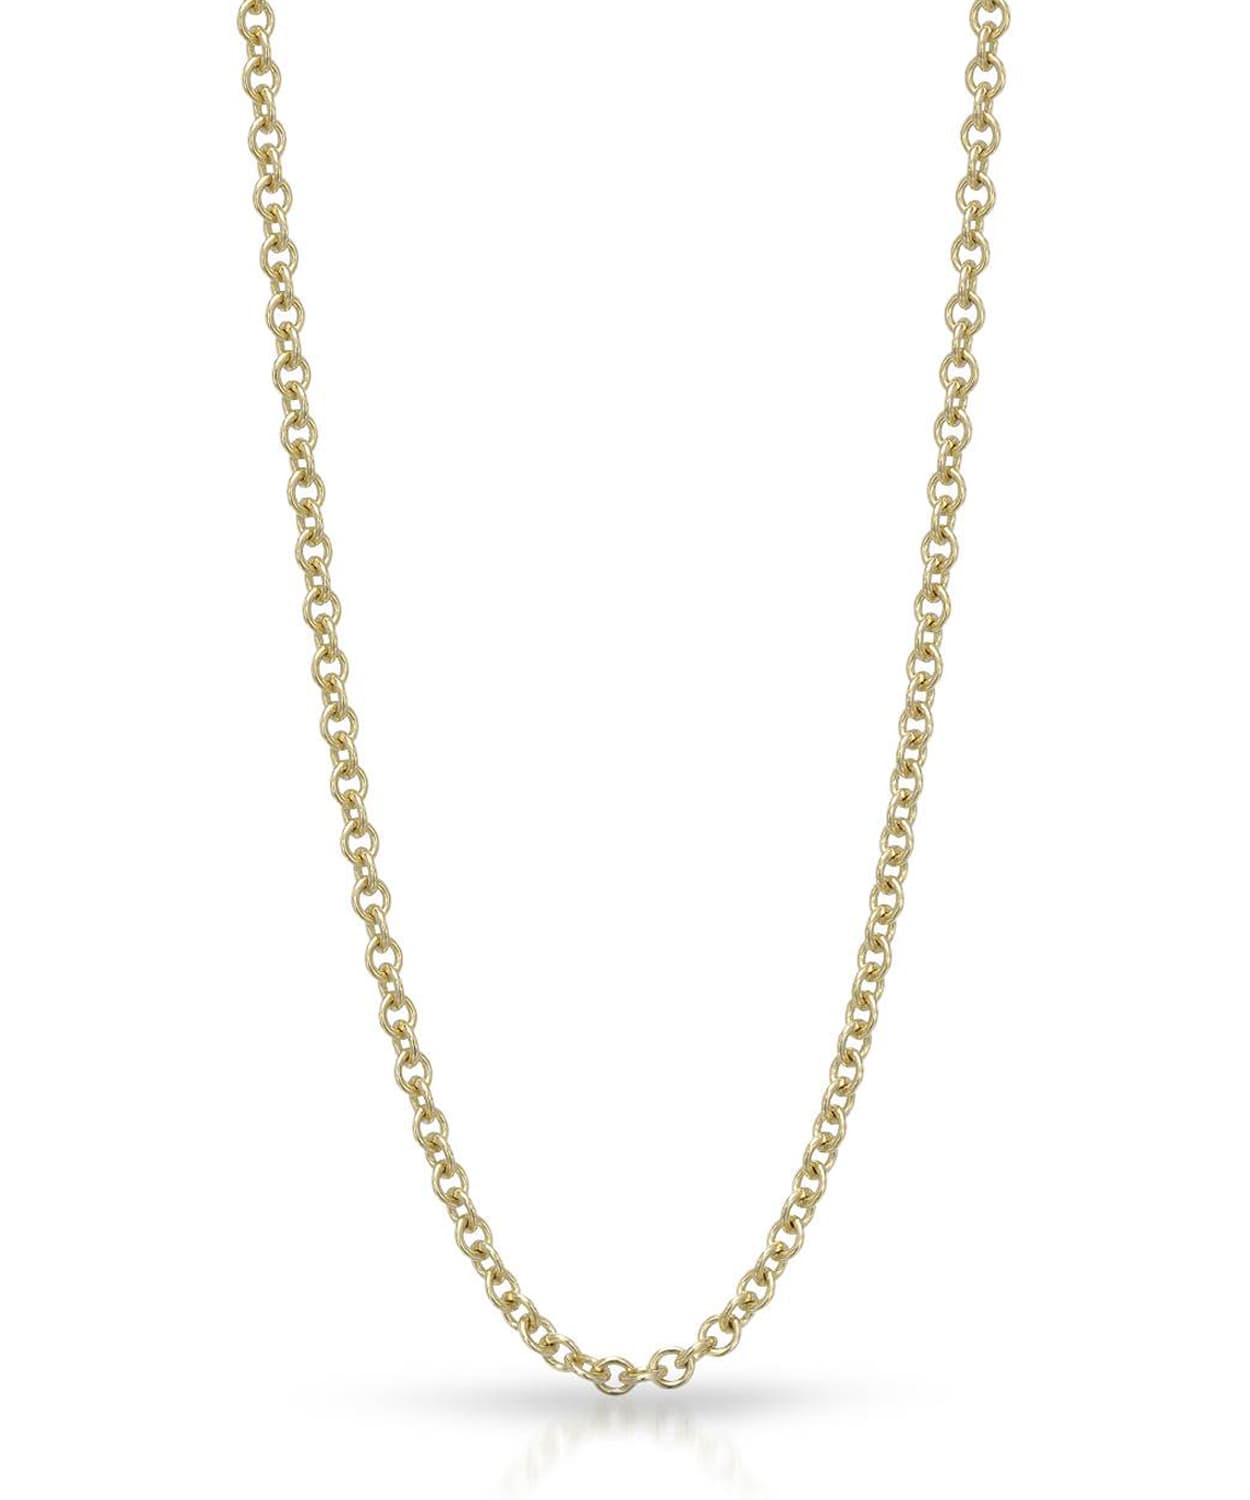 ESEMCO 1.8mm 14K Yellow Gold Rolo Chain View 1